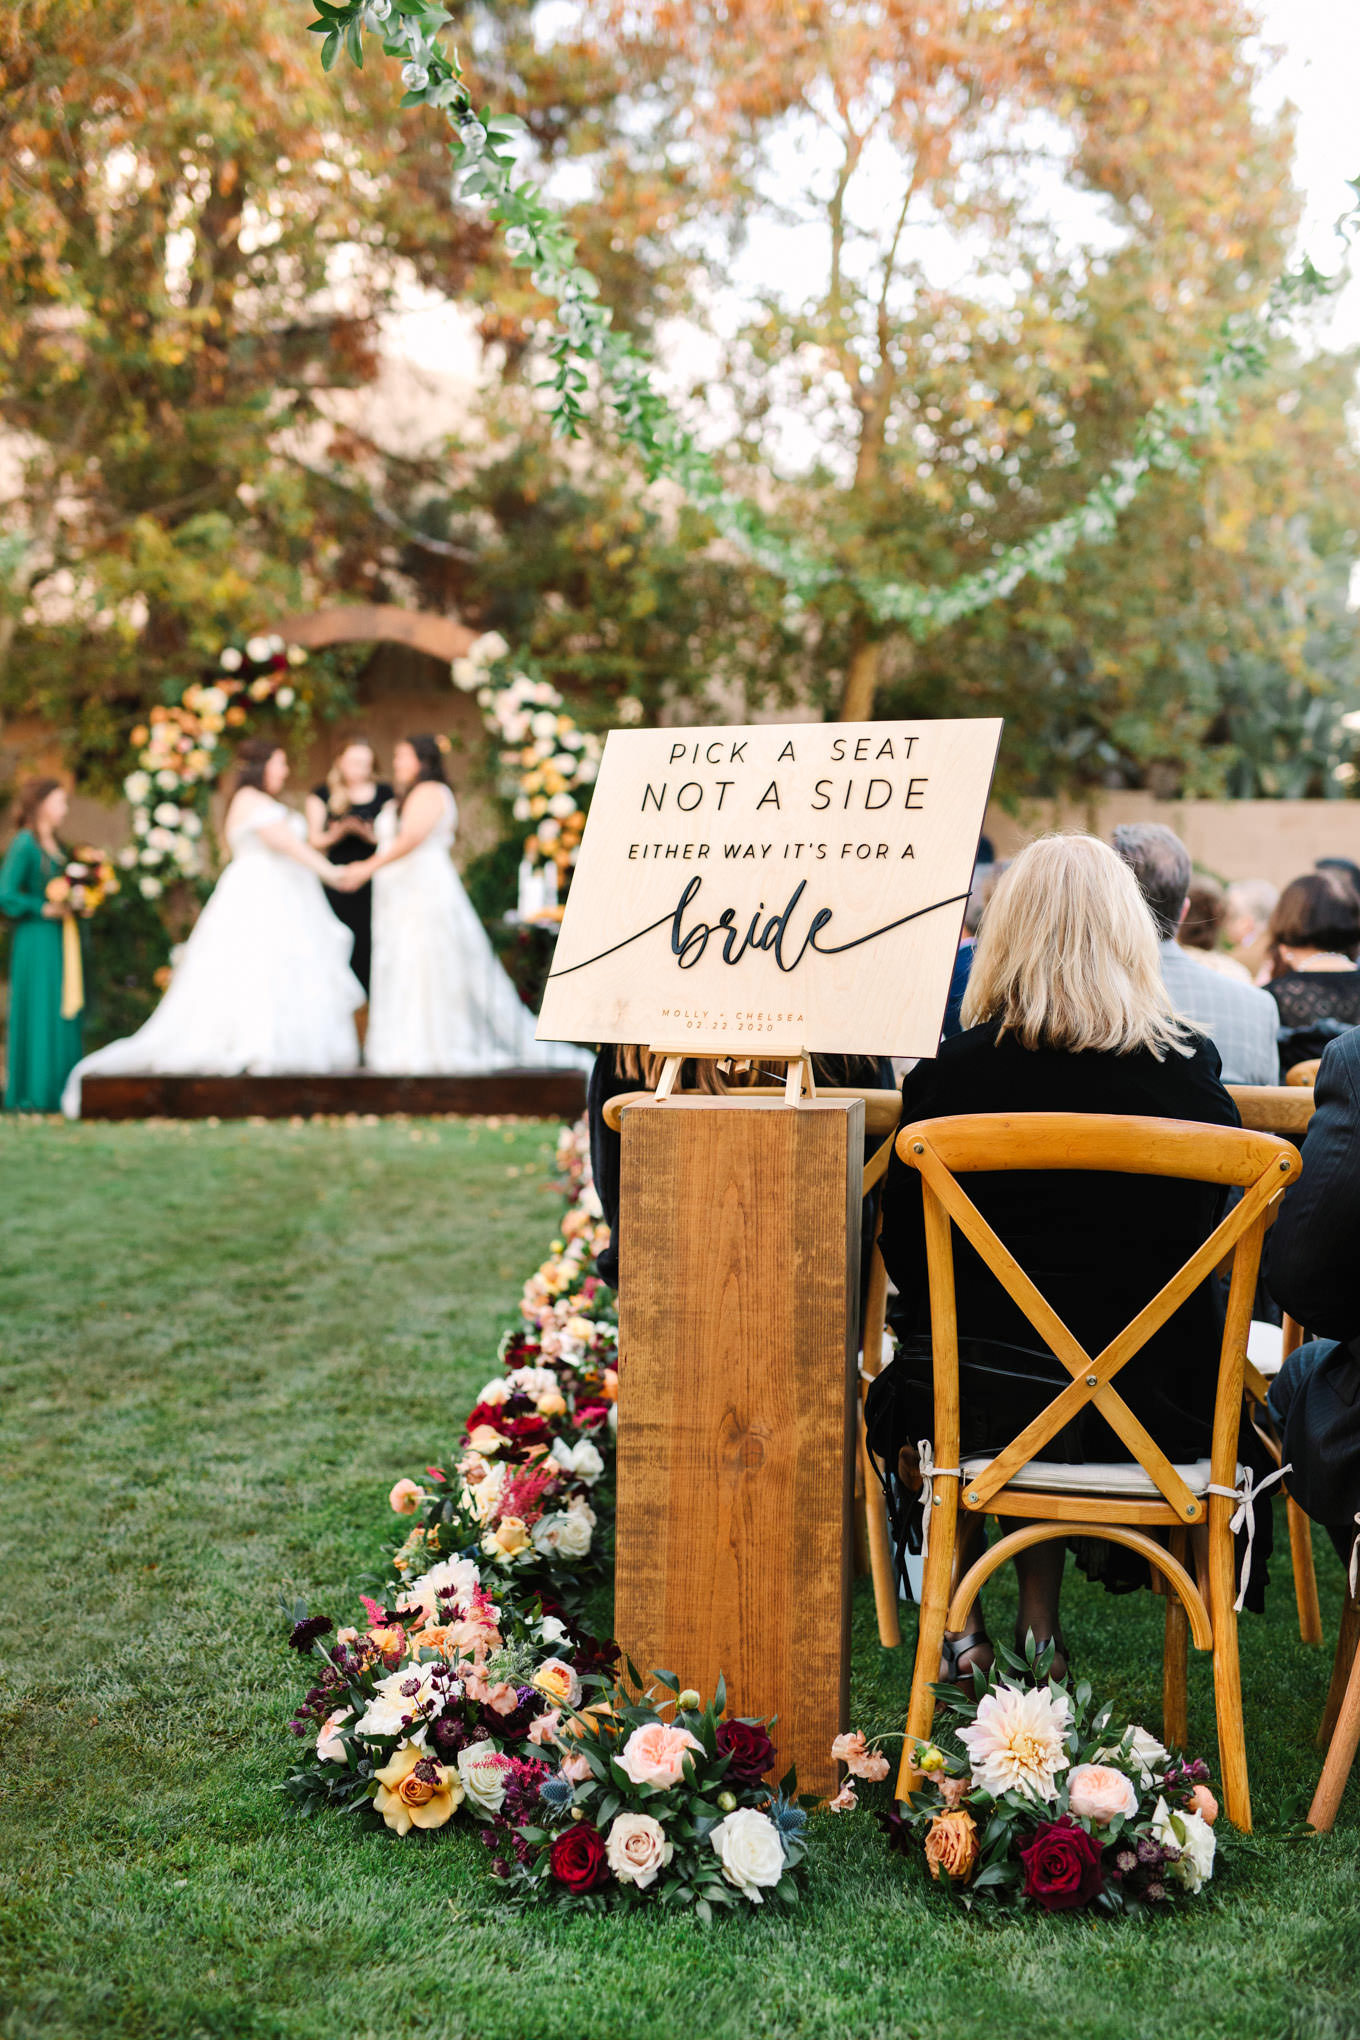 Backyard wedding sign for two brides | Engagement, elopement, and wedding photography roundup of Mary Costa’s favorite images from 2020 | Colorful and elevated photography for fun-loving couples in Southern California | #2020wedding #elopement #weddingphoto #weddingphotography   Source: Mary Costa Photography | Los Angeles